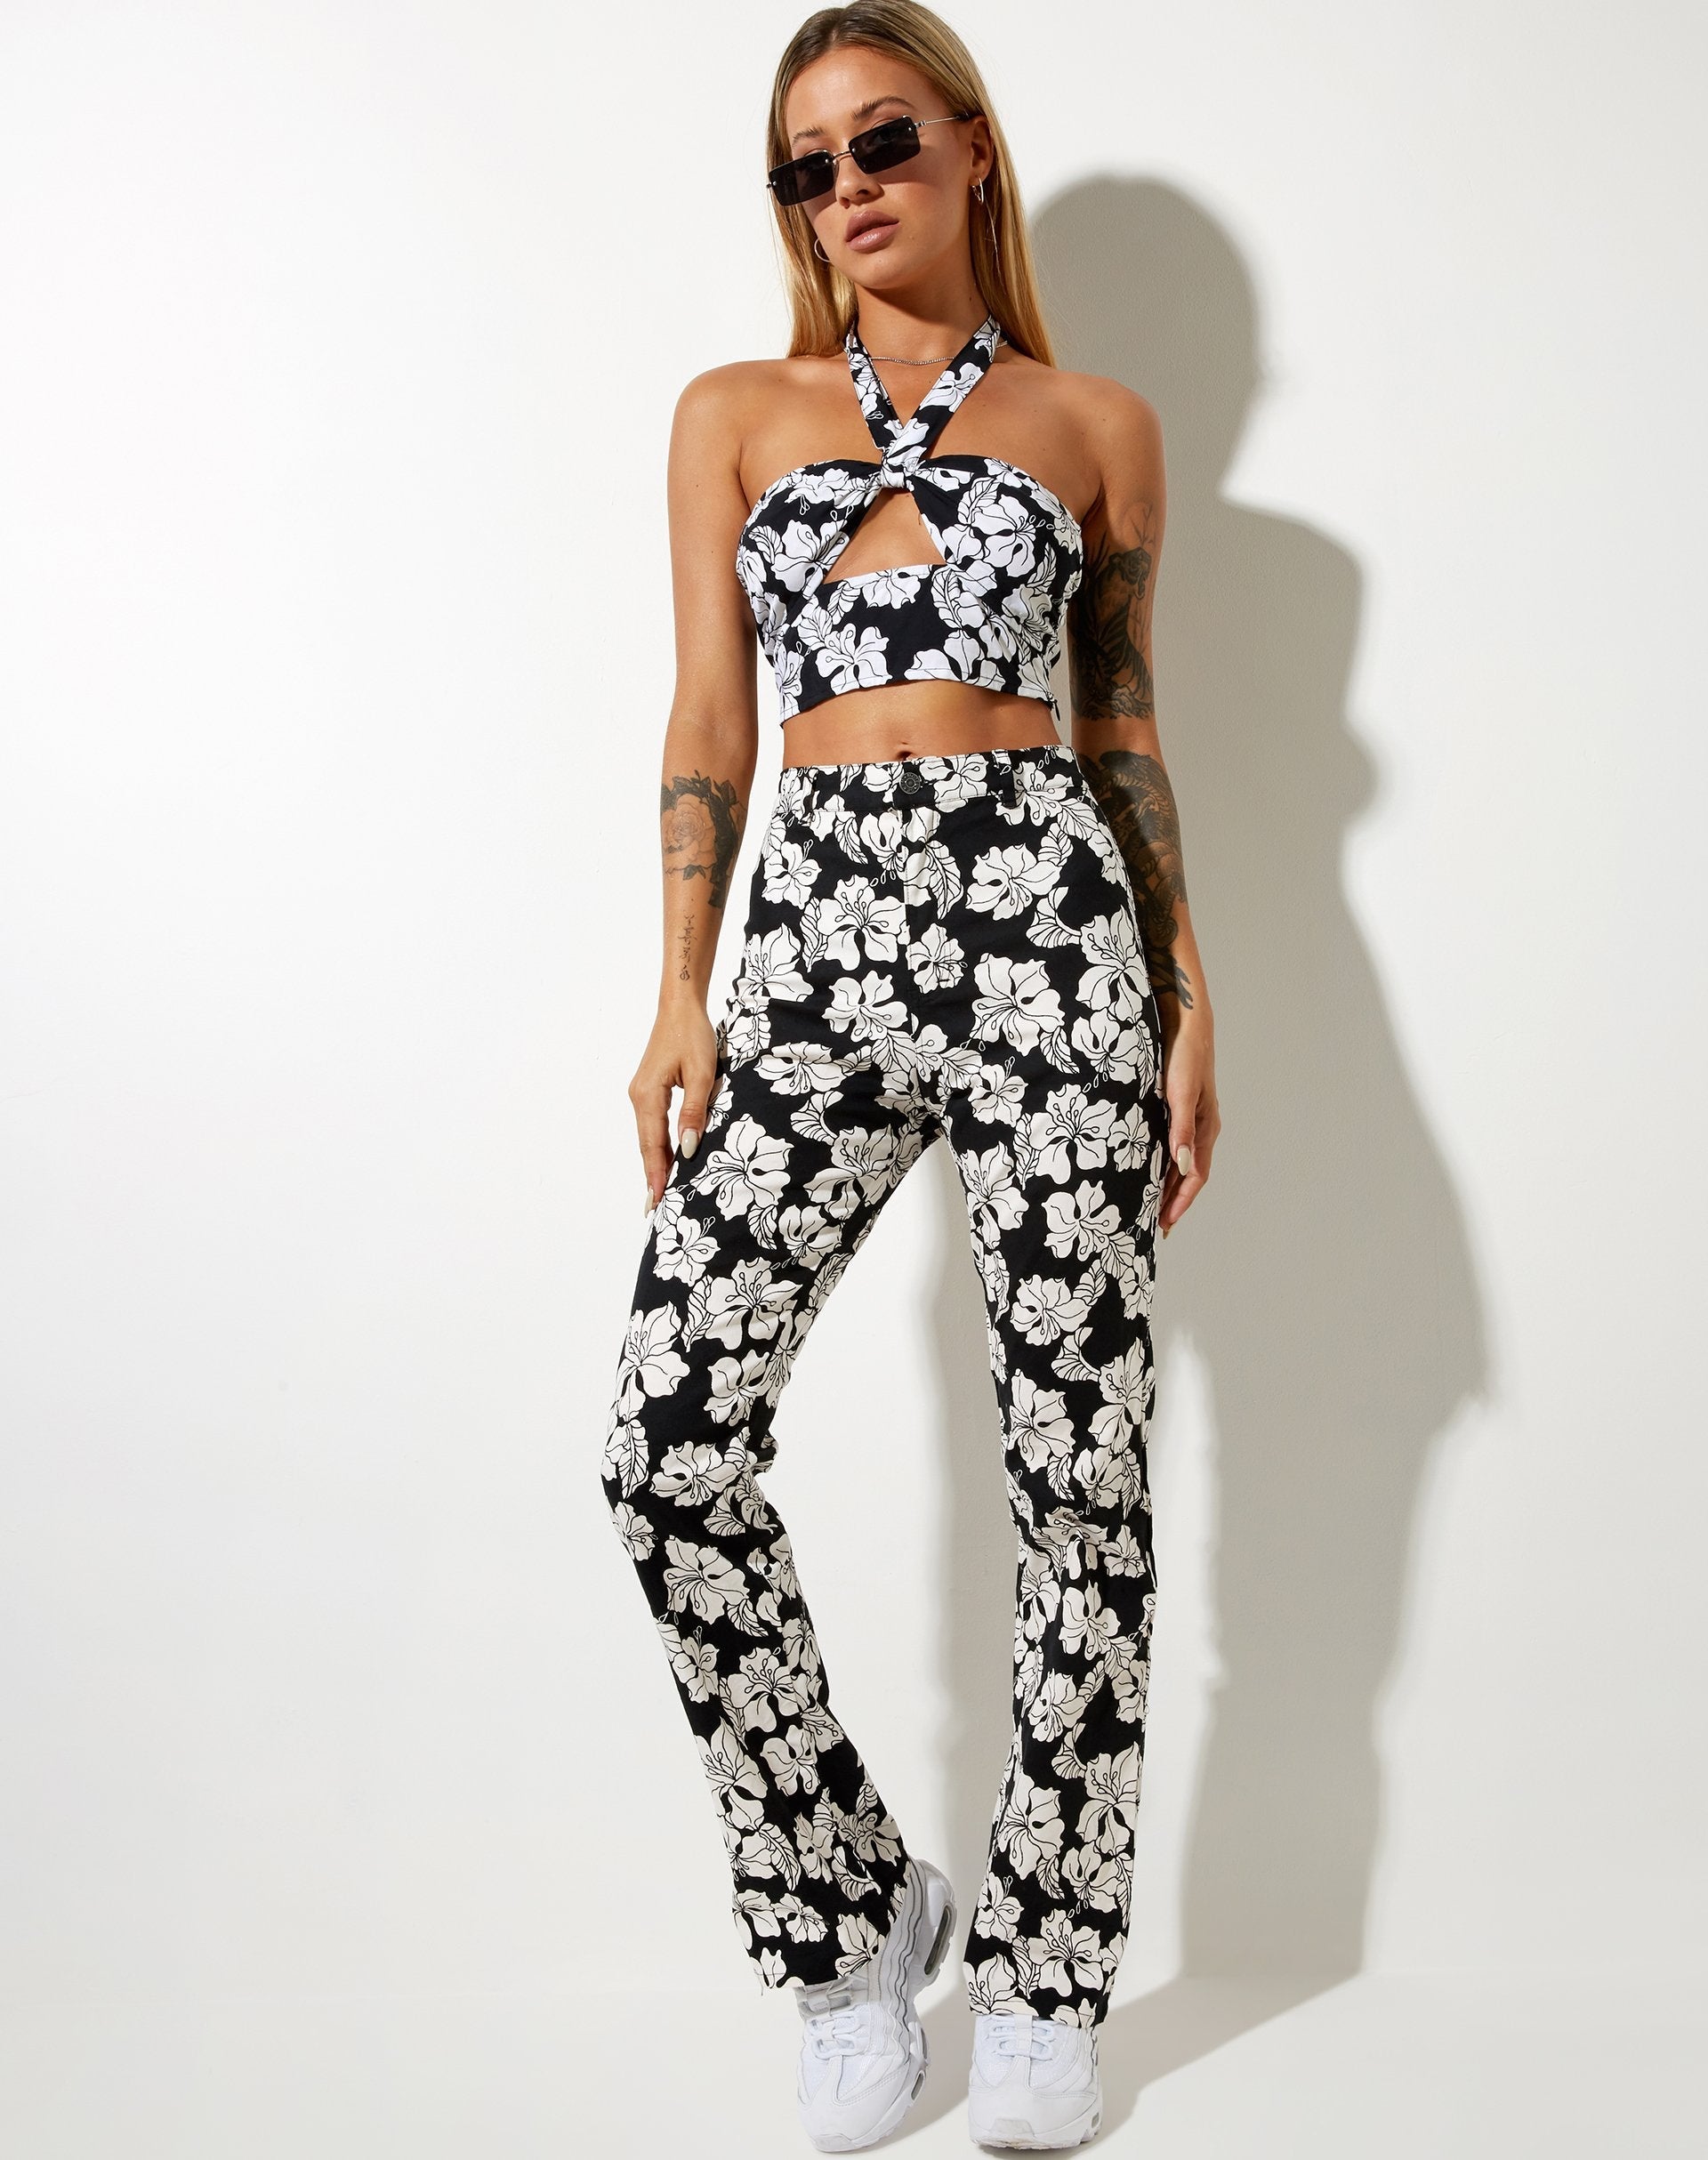 Zoven Trouser in Vacation Black White